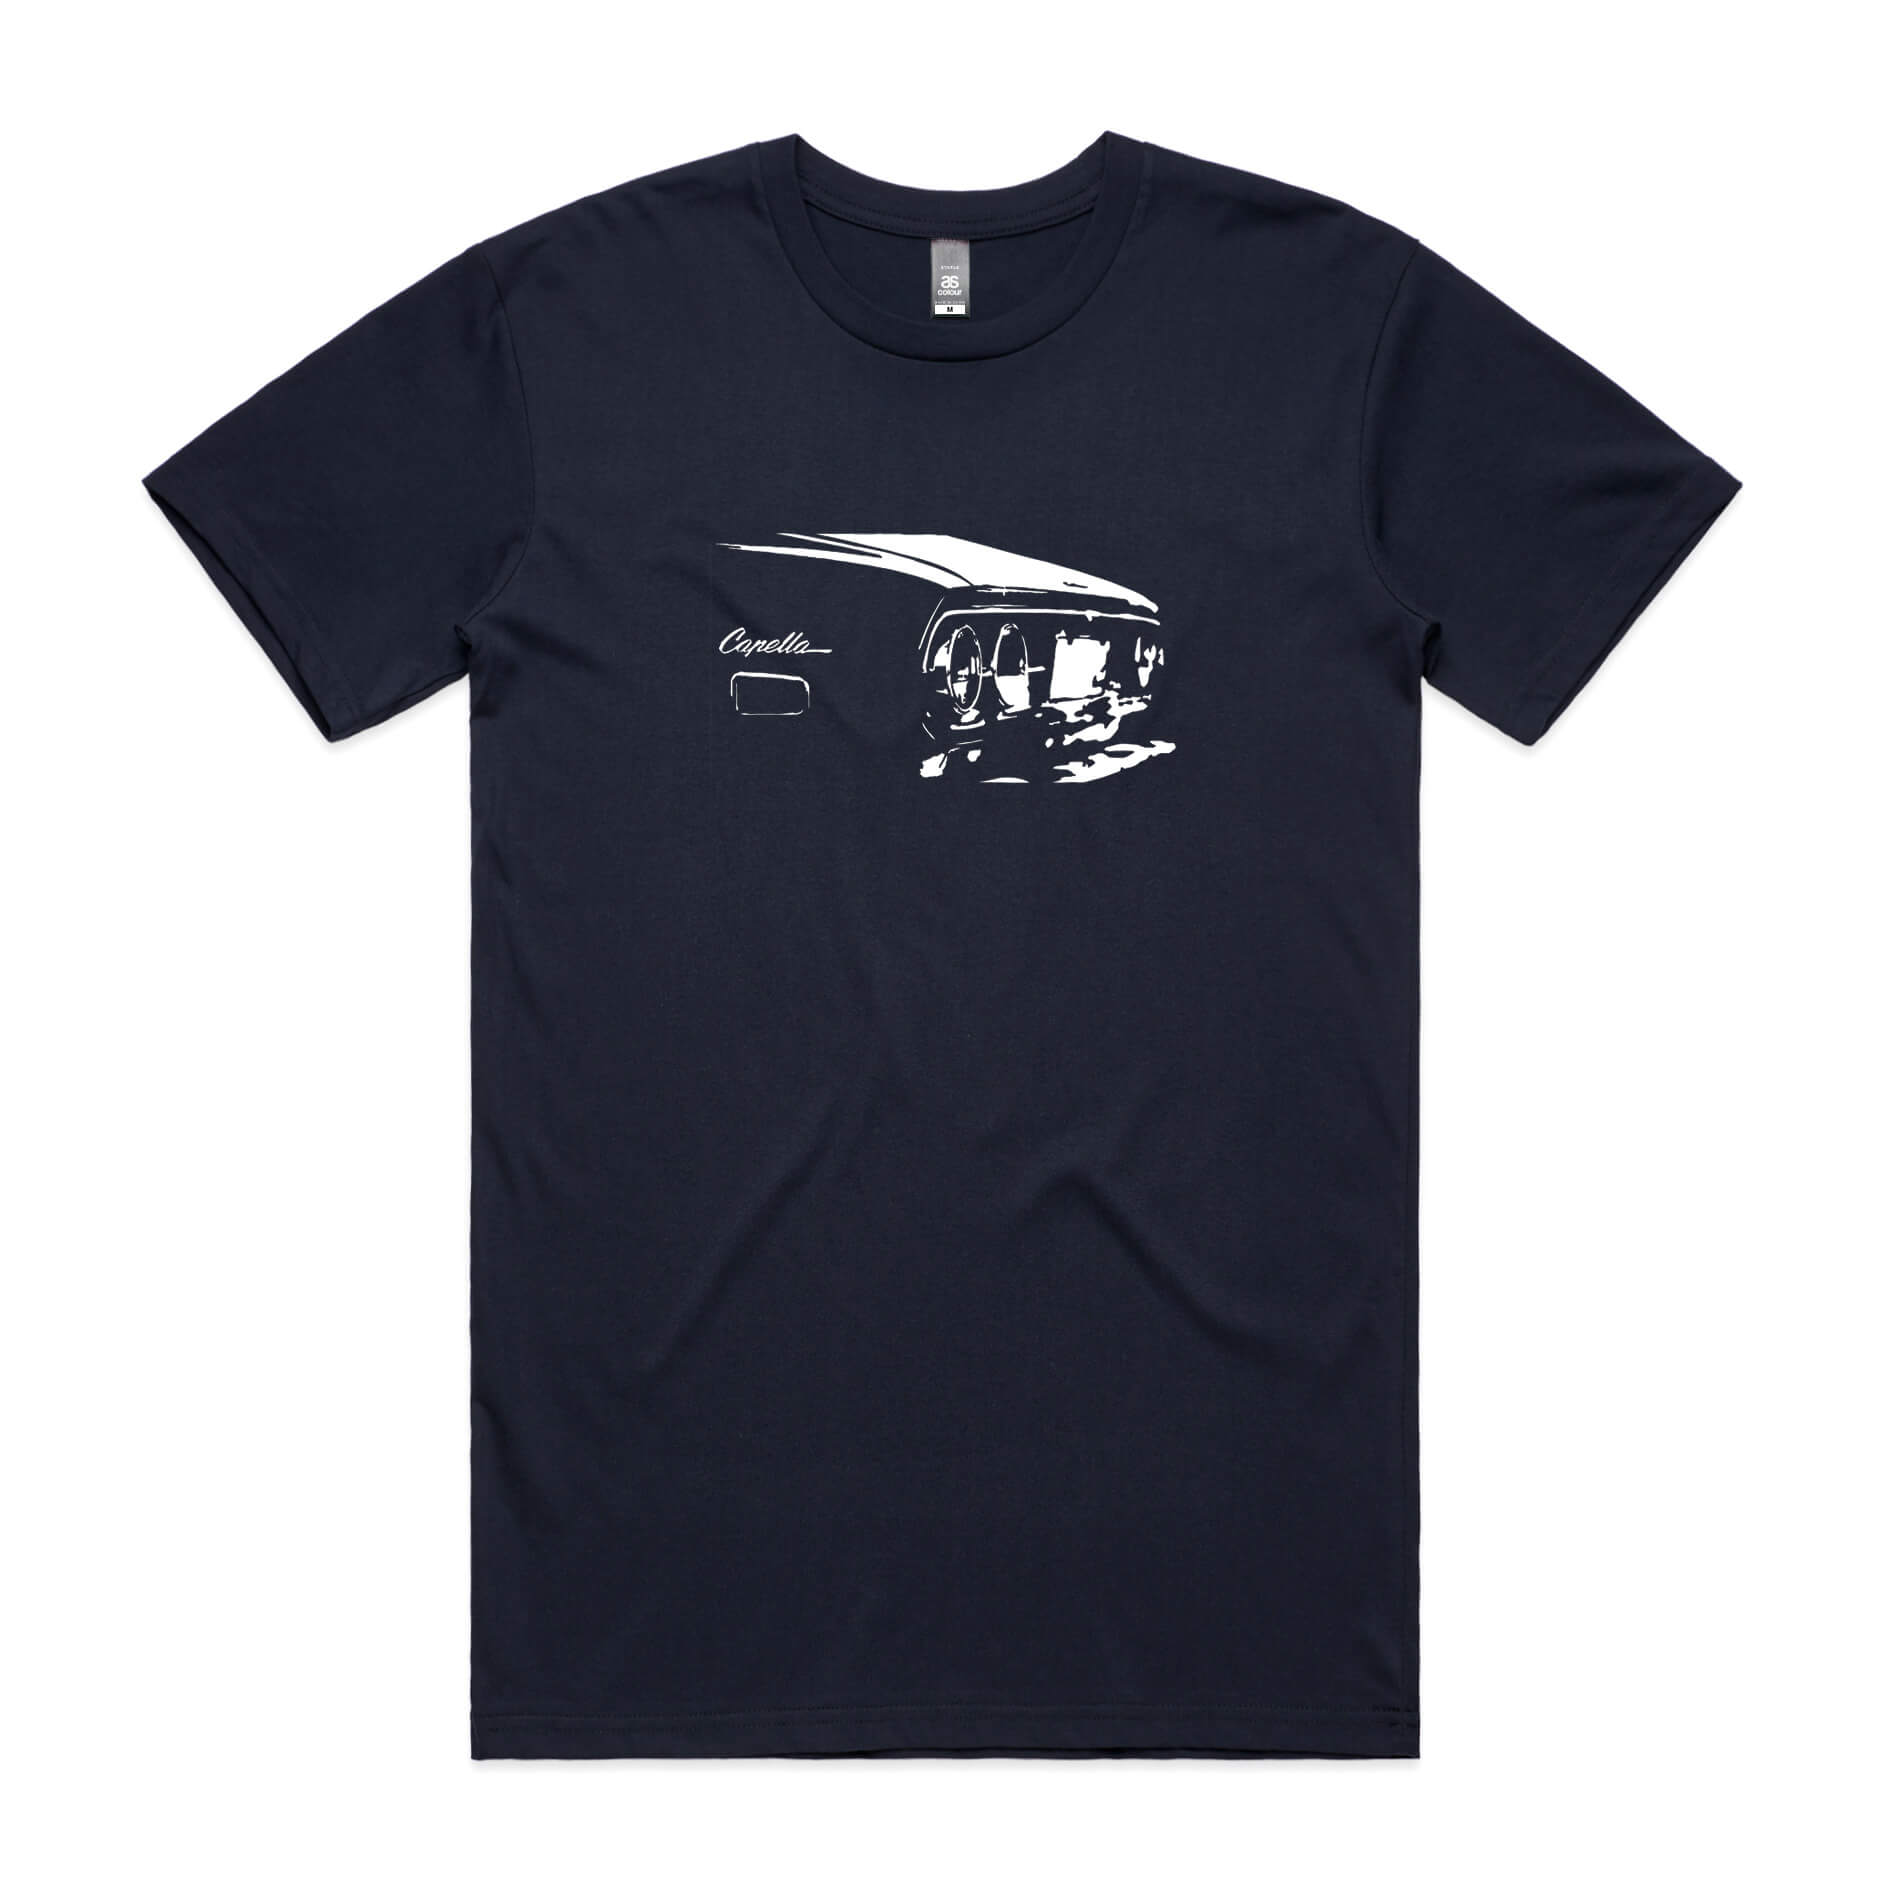 Mazda Capella t-shirt in navy blue with white RX2 car graphic